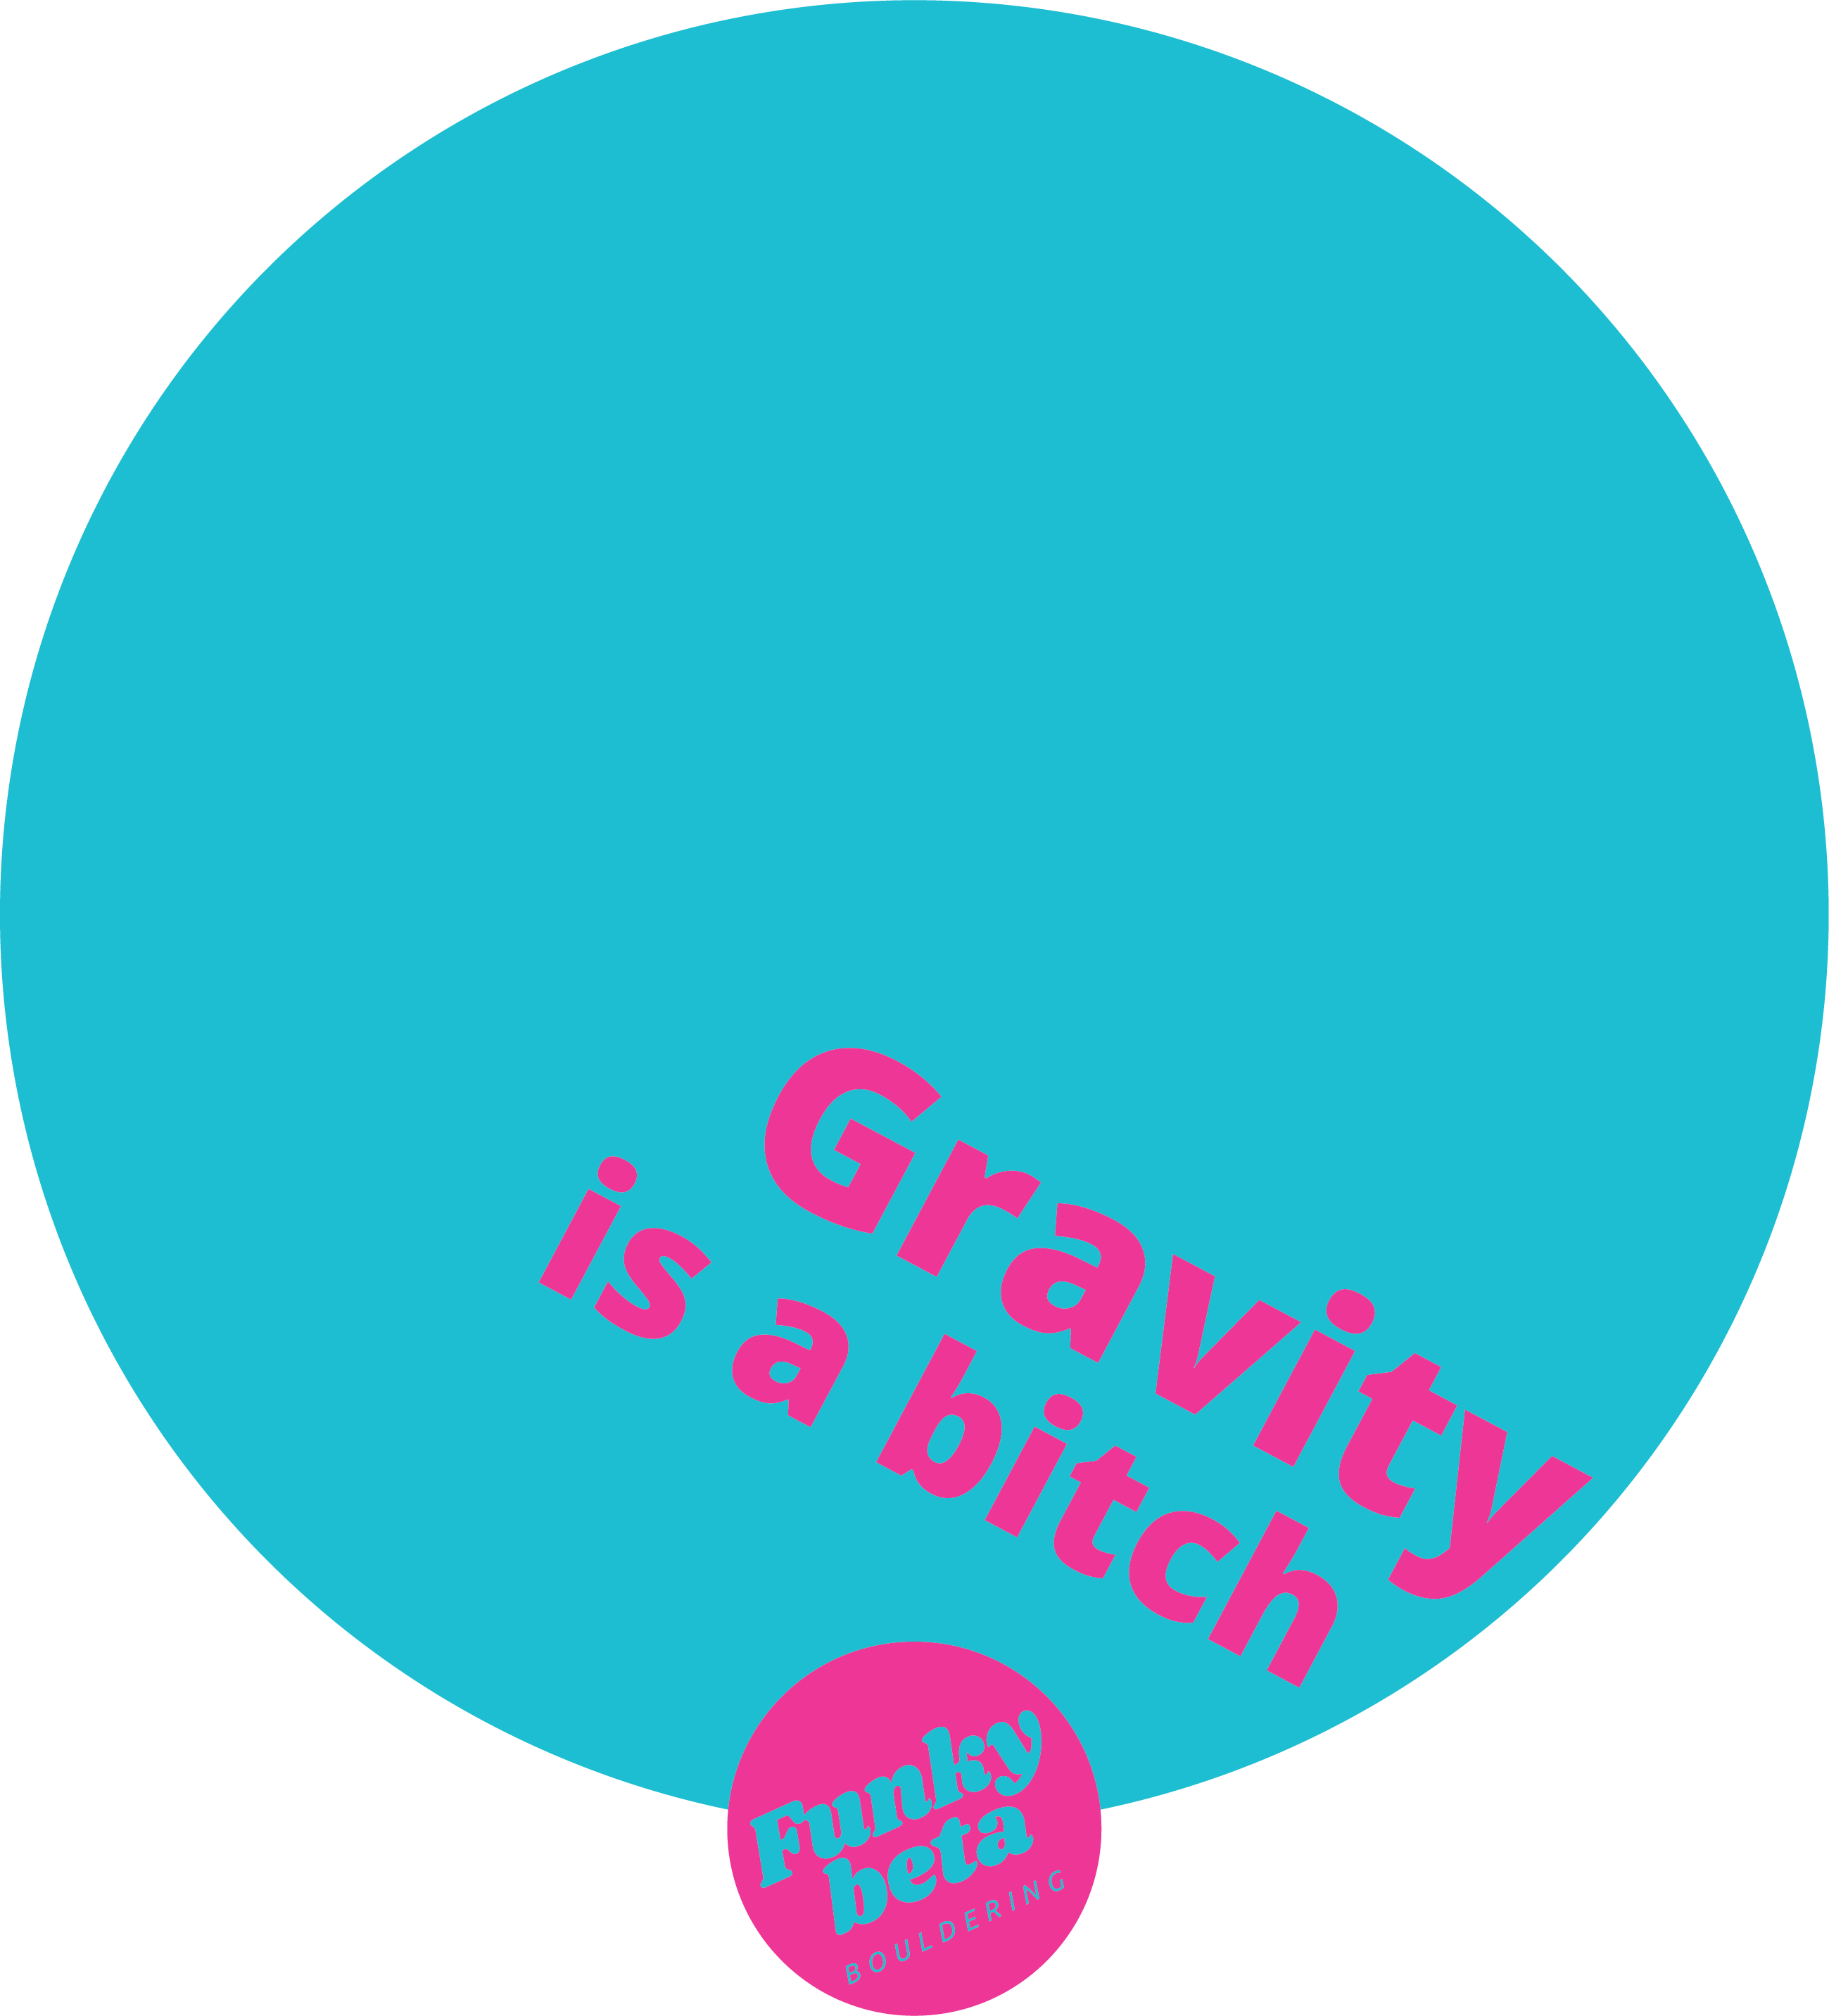 Gravity is a b**** - on stock